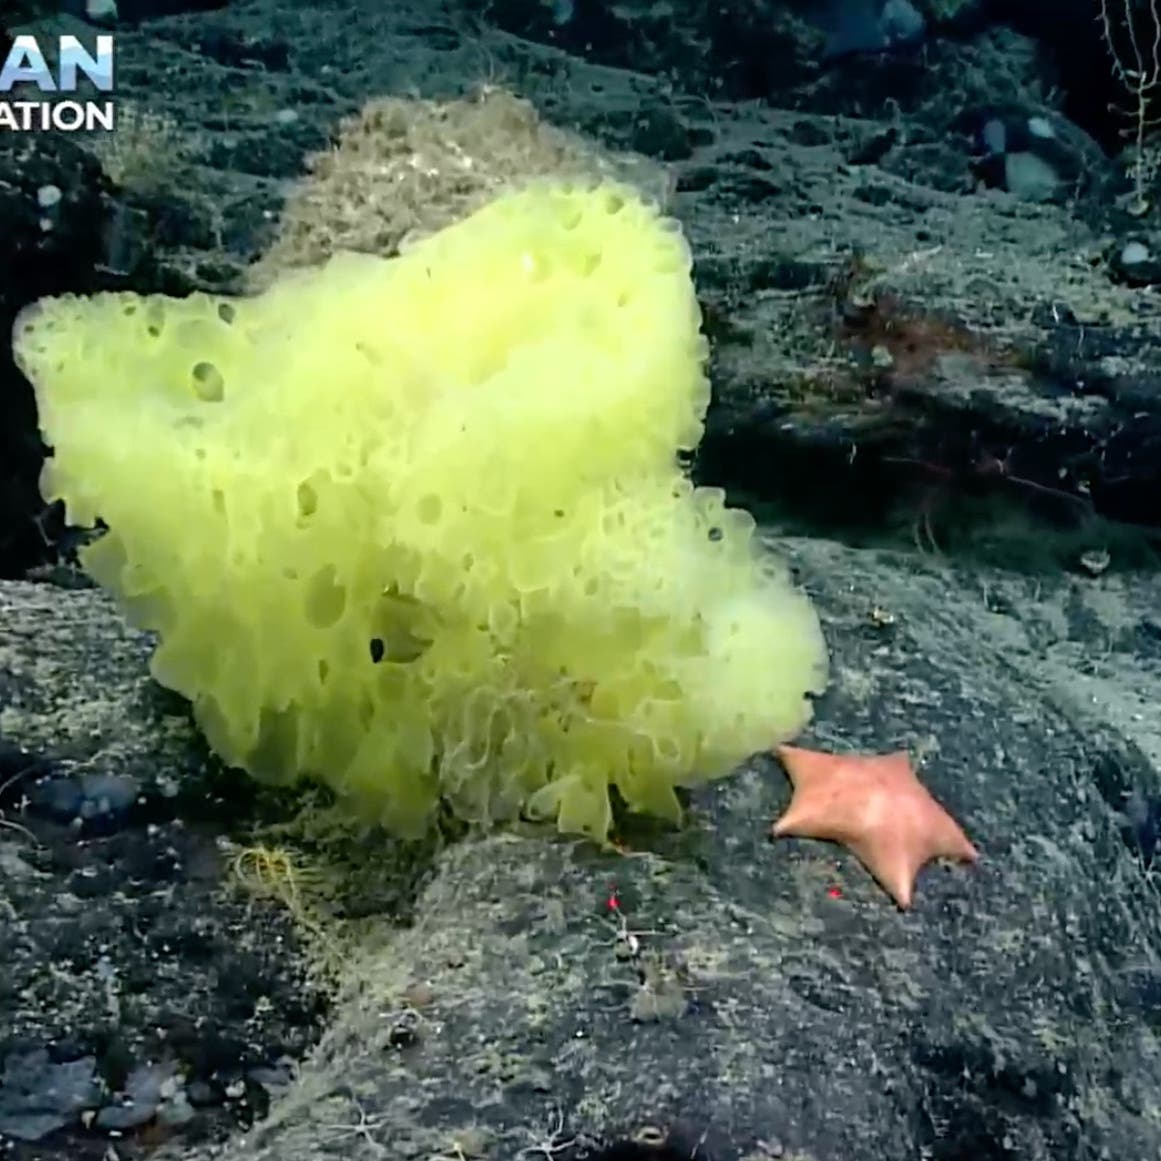 Scientists discover Spongebob Squarepants and Patrick lookalikes a mile underwater